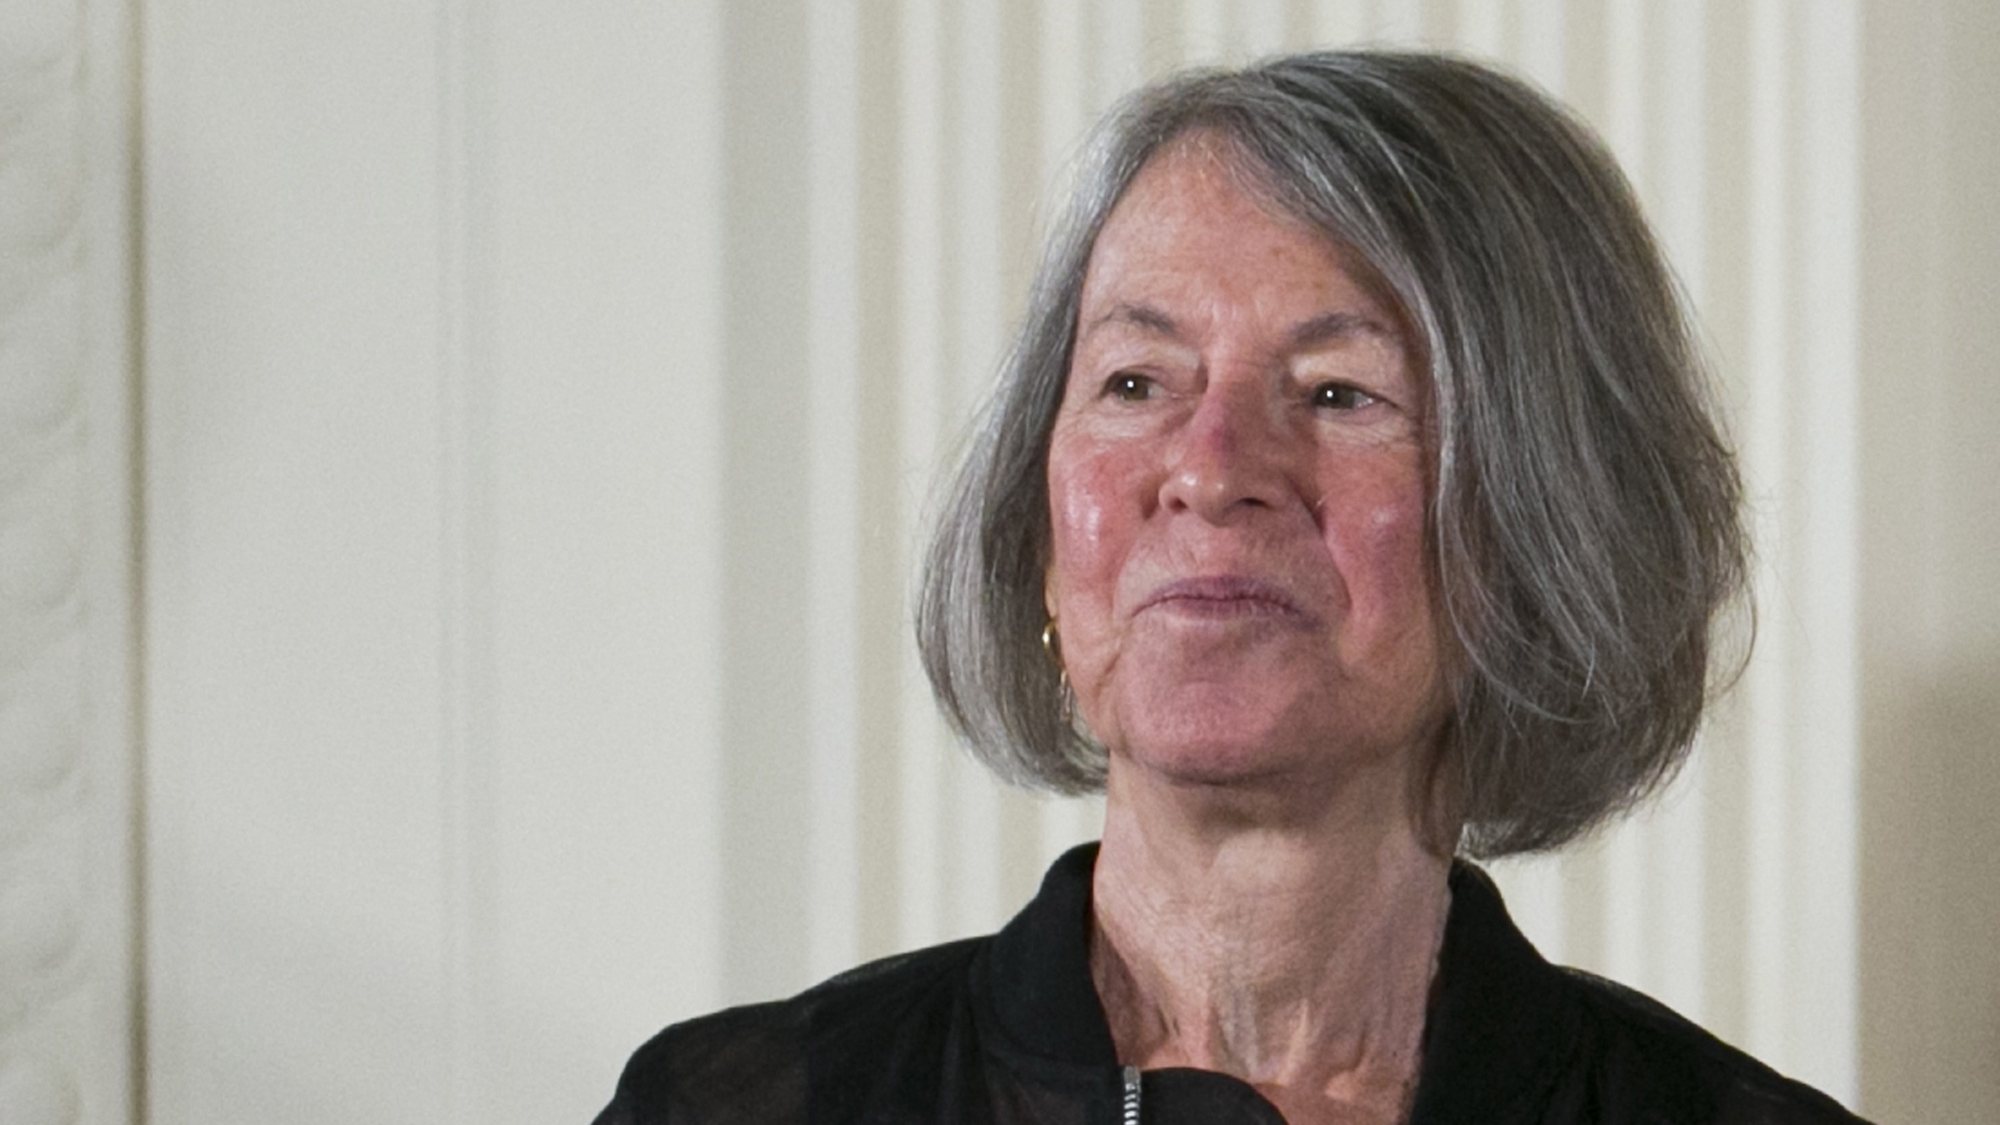 epa08728920 (FILE) - US poet Louise Gluck with the 2015 National Humanities Medal during a ceremony in the East Room of the White House in Washington, DC, USA, 22 September 2016 (reissued 08 October 2020). The 2020 Nobel Prize in Literature has been awarded to Louise Glueck, the Swedish Academy has announced.  EPA/SHAWN THEW *** Local Caption *** 53031868